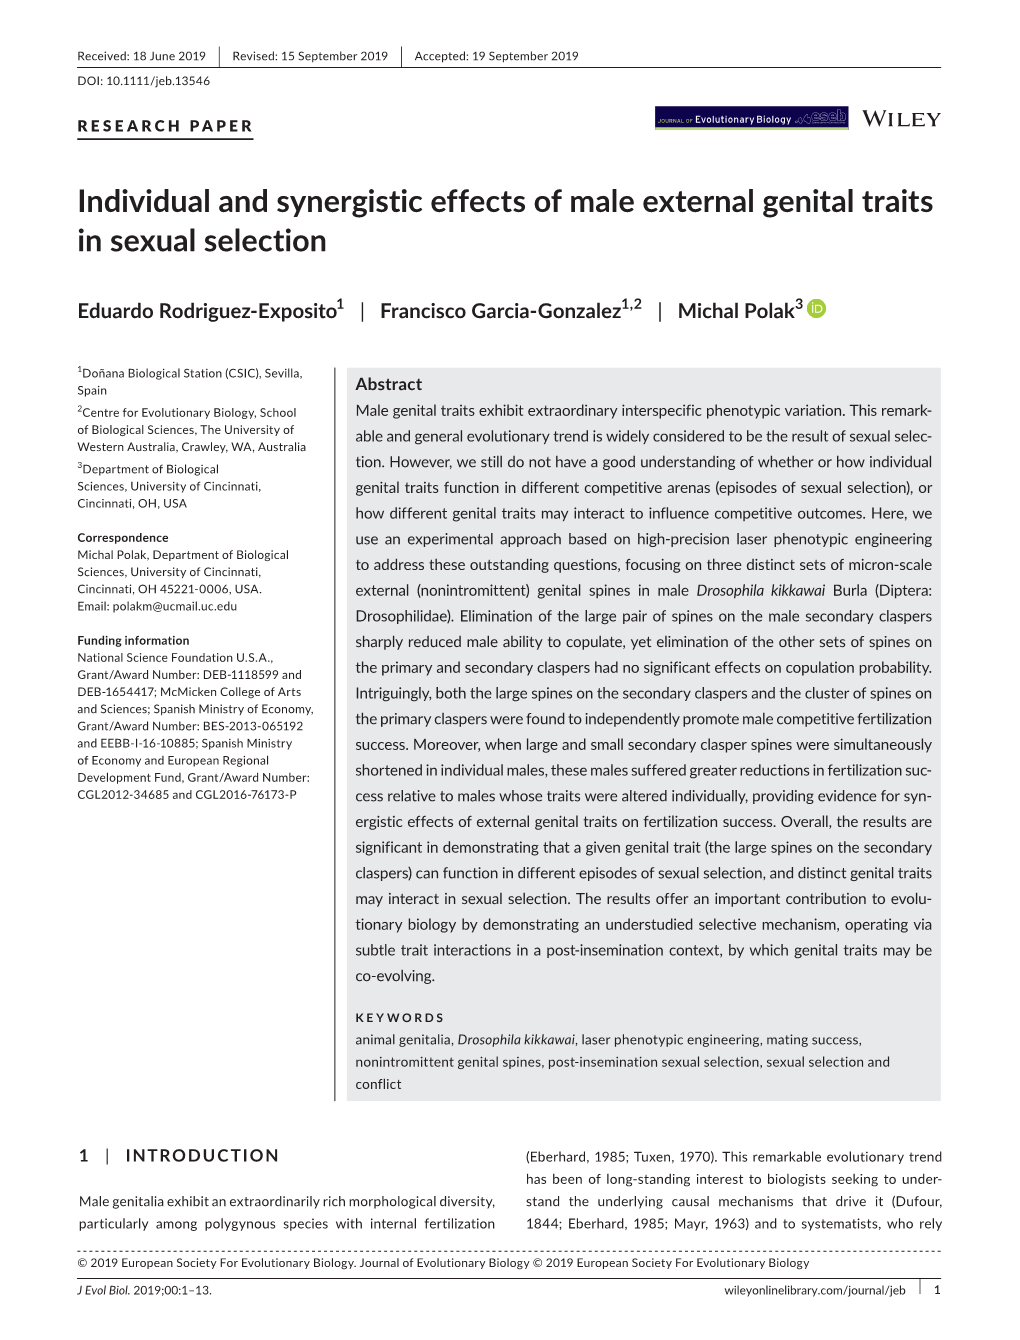 Individual and Synergistic Effects of Male External Genital Traits in Sexual Selection